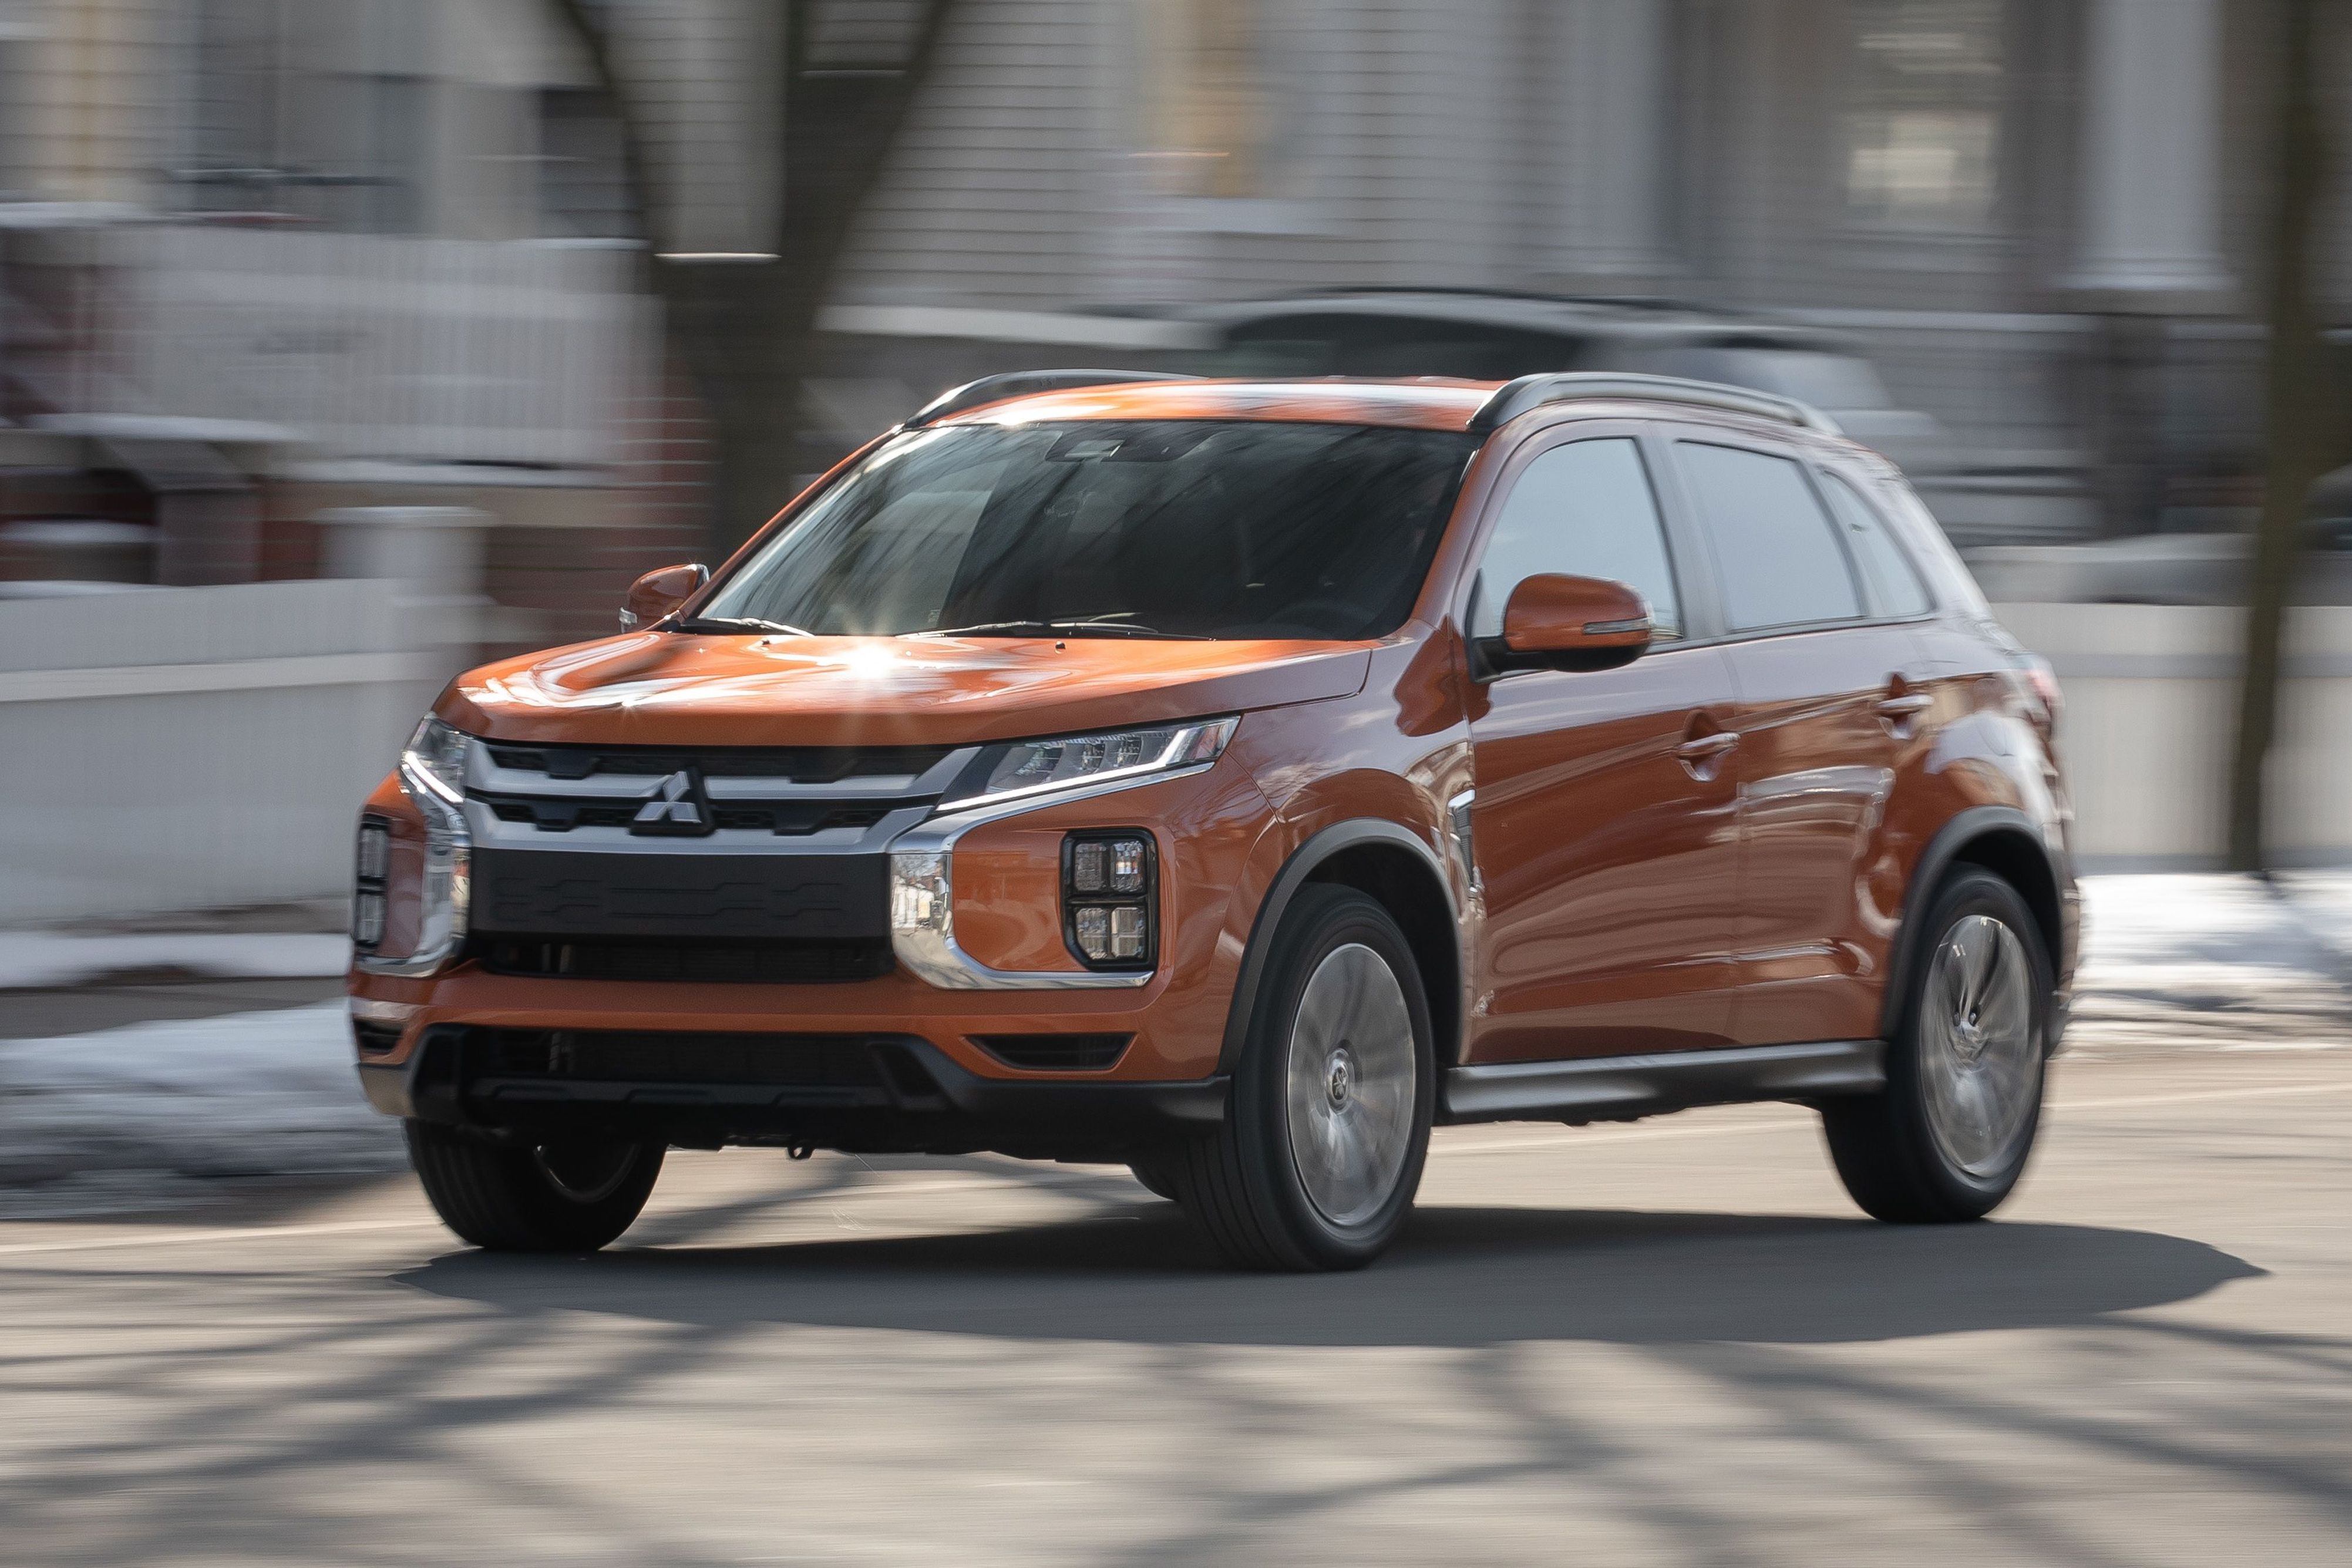 2022 Mitsubishi Outlander Sport Review, Pricing, and Specs